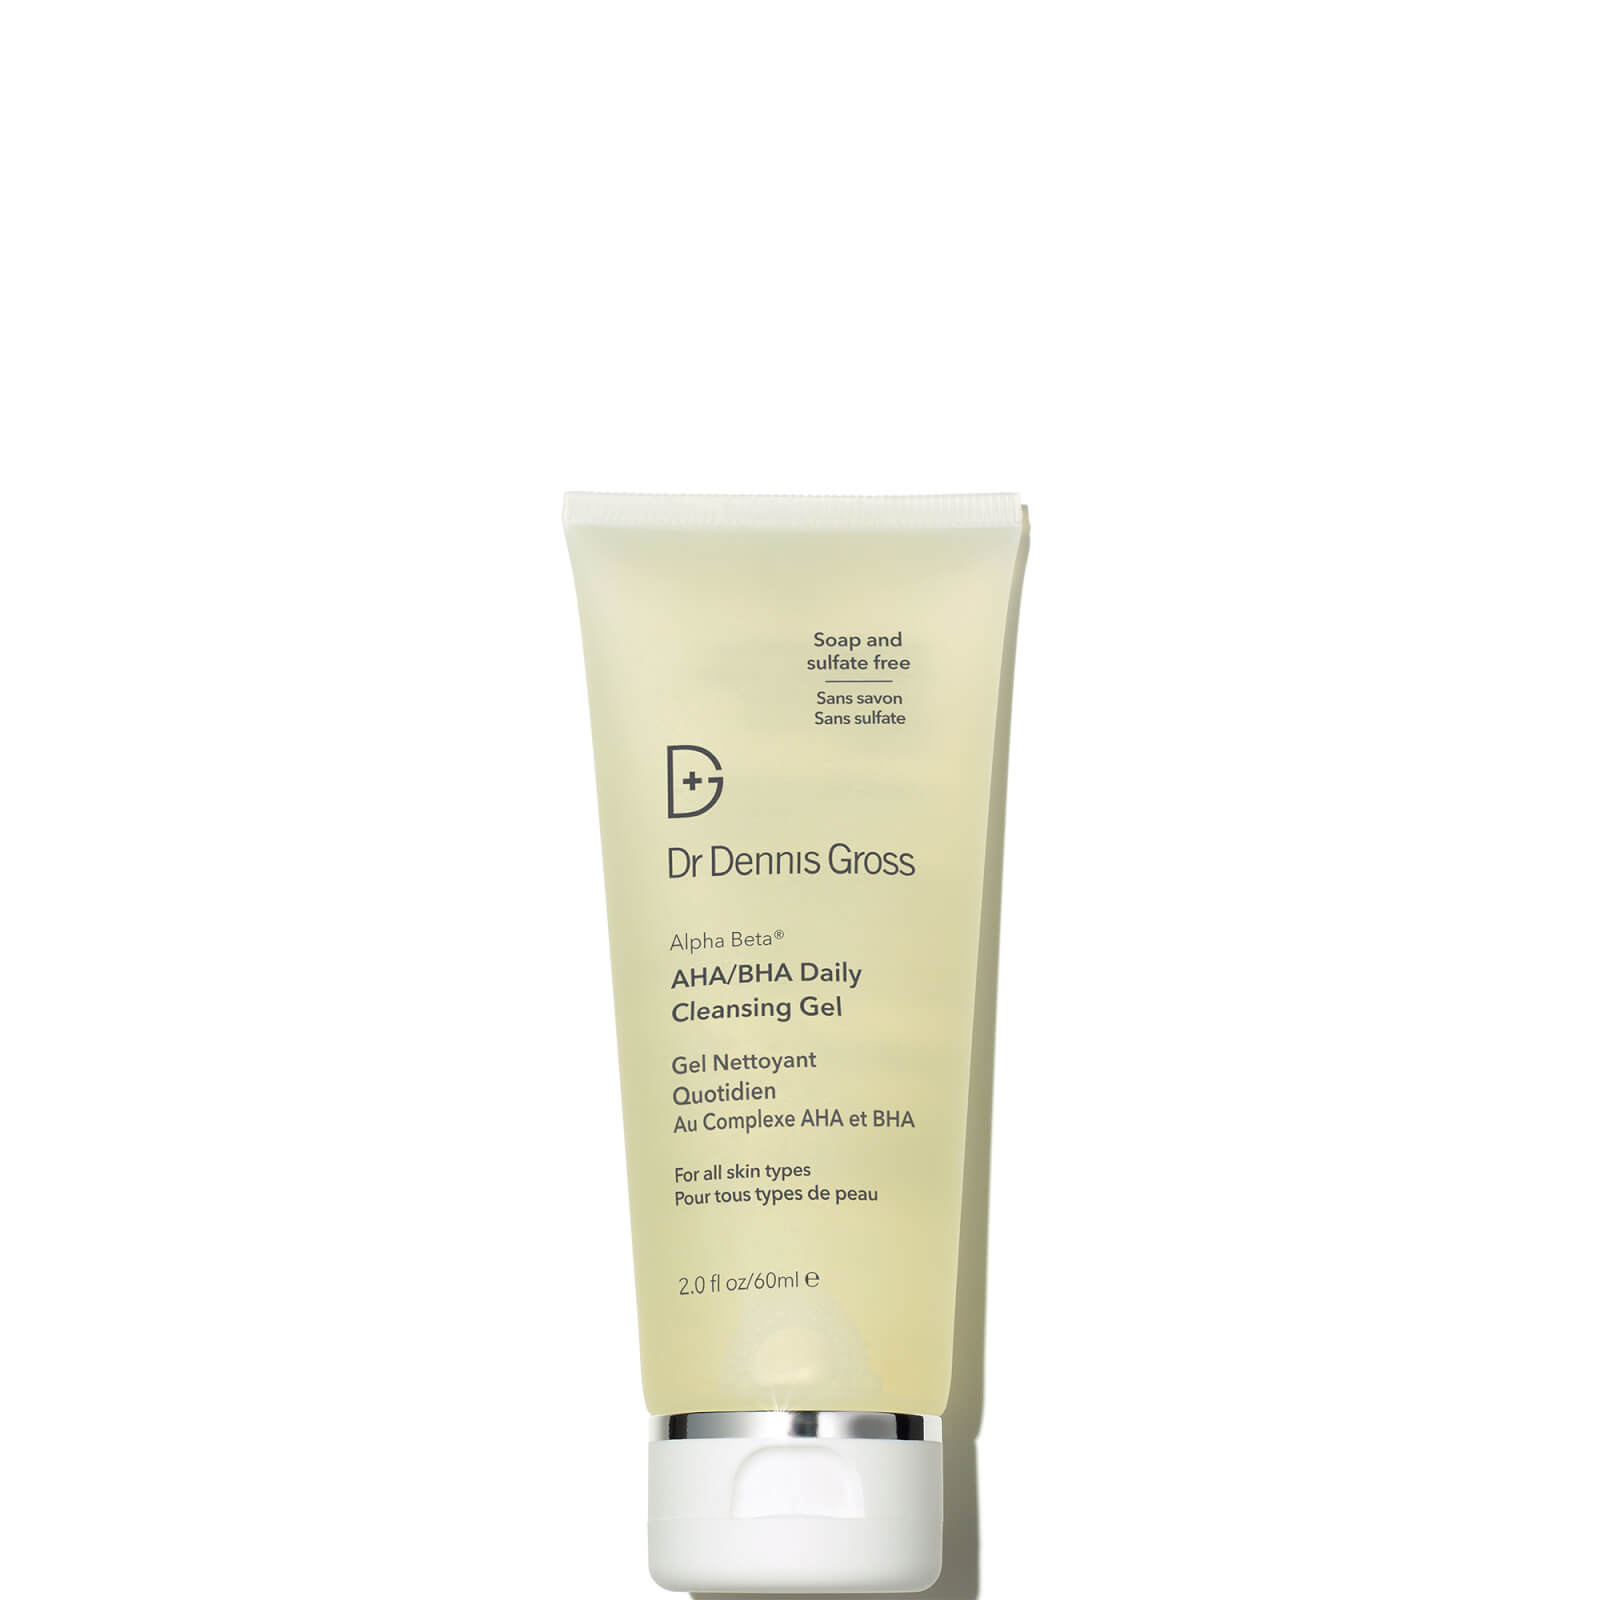 Photos - Facial / Body Cleansing Product Dr Dennis Gross Skincare Alpha Beta AHA/BHA Daily Cleansing Gel (Various S